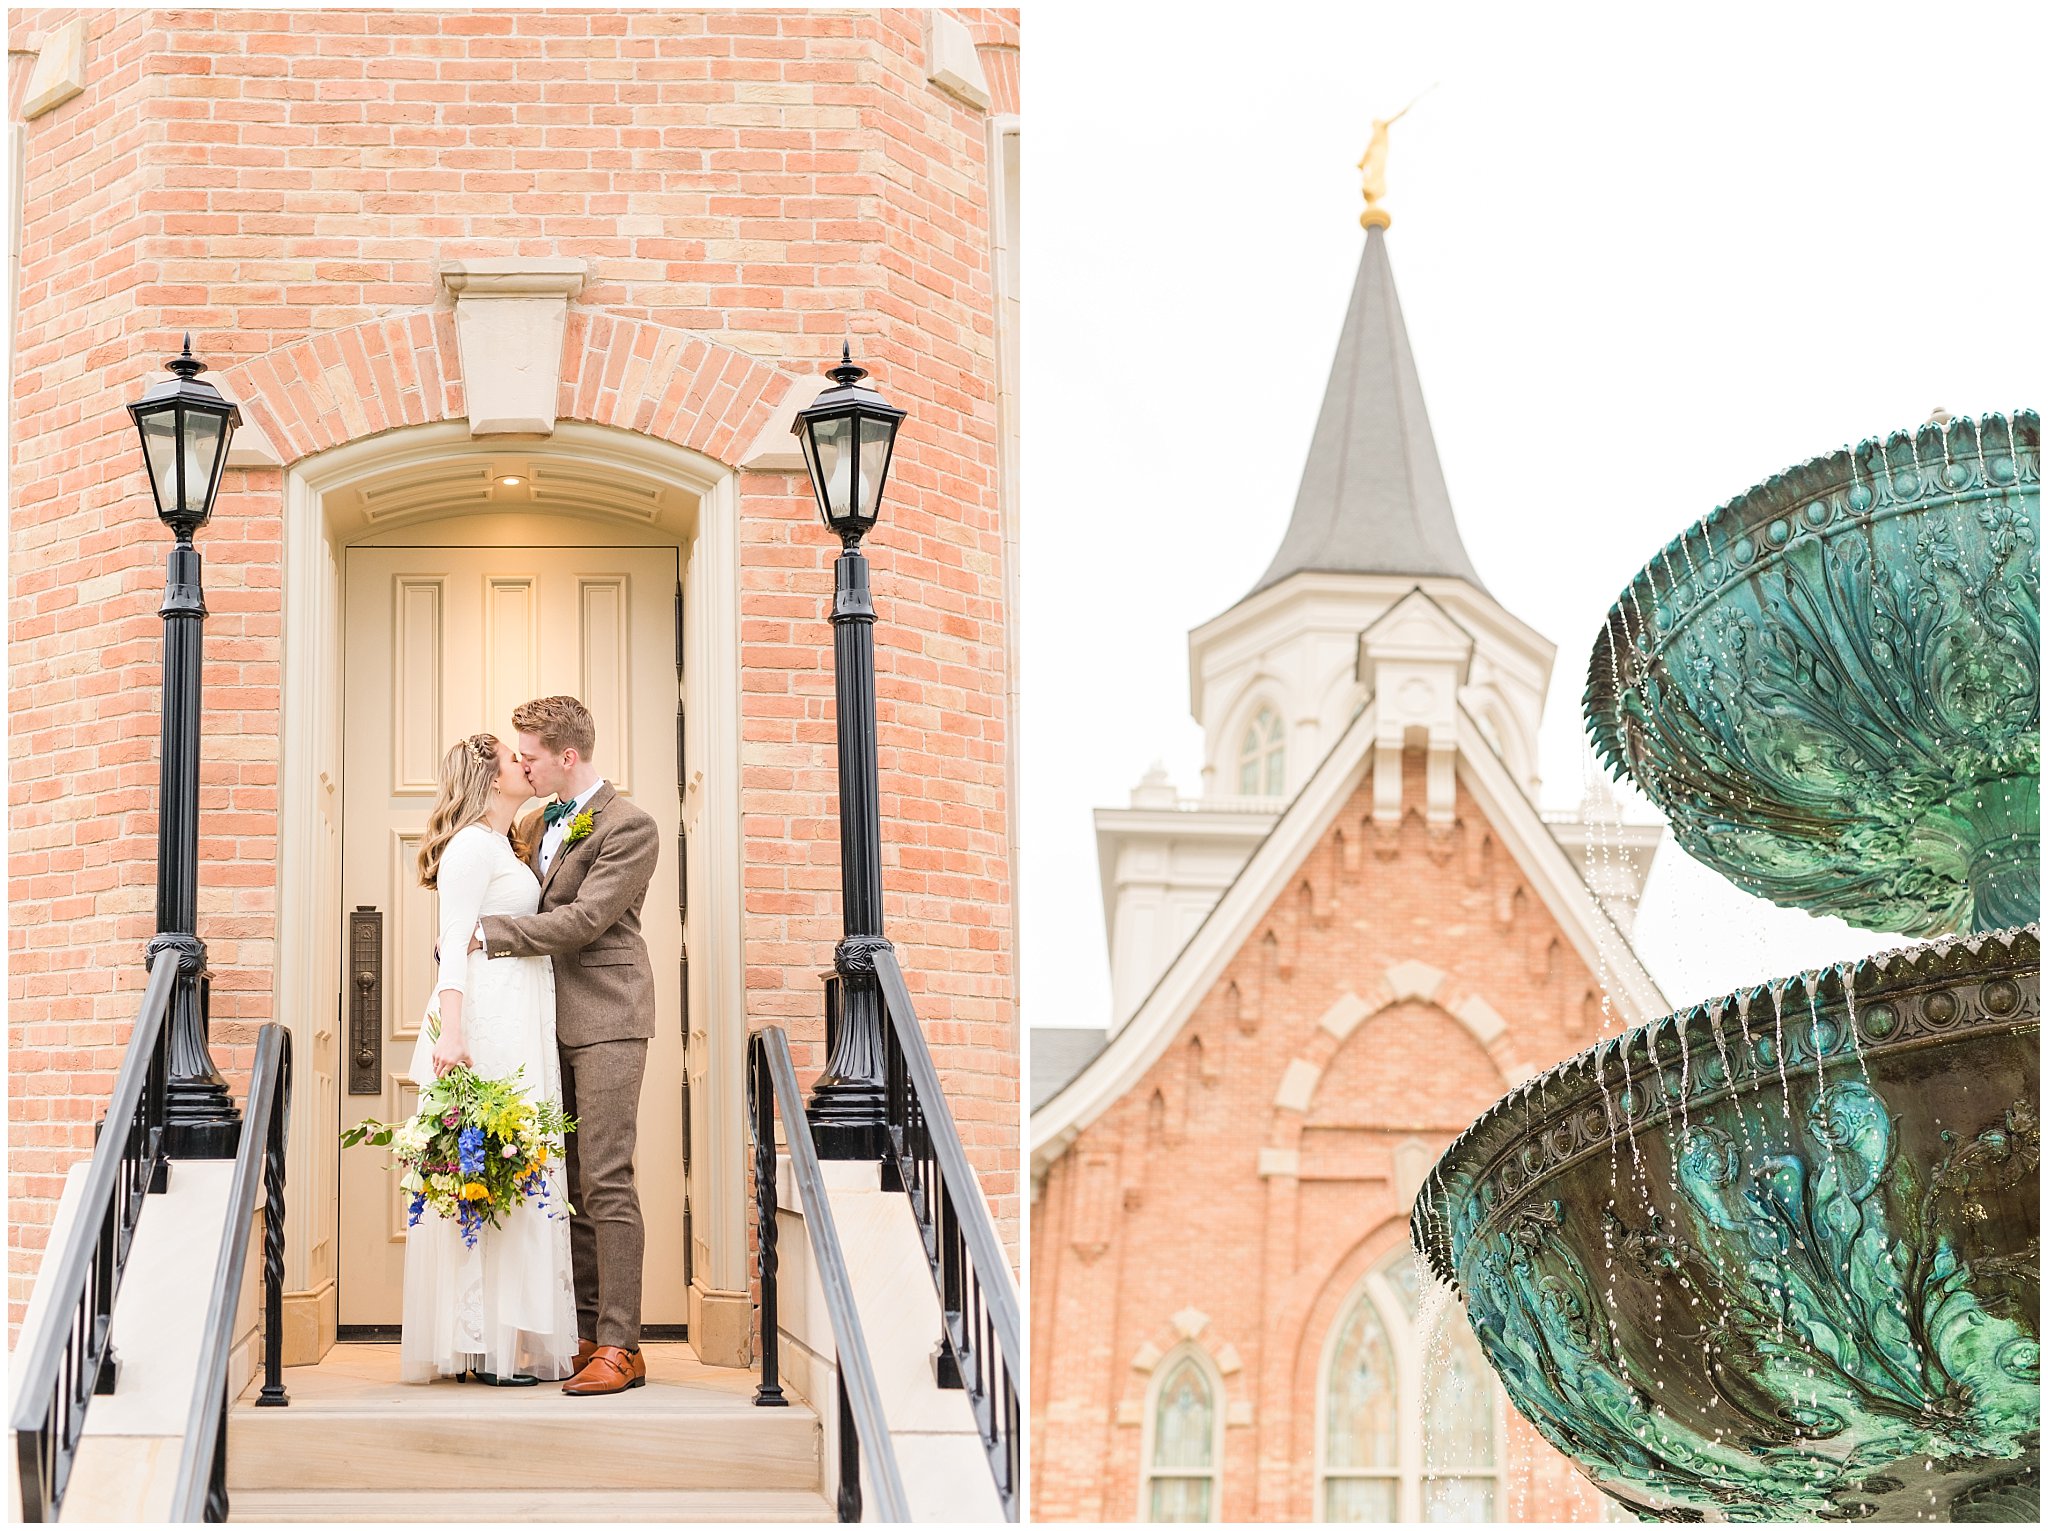 Bride wearing flowy dress and groom wearing tweed suit and green bow tie for vintage inspired wedding attire | Emerald green, gold wedding colors | Provo City Center Temple Spring Formal Session | Jessie and Dallin Photography